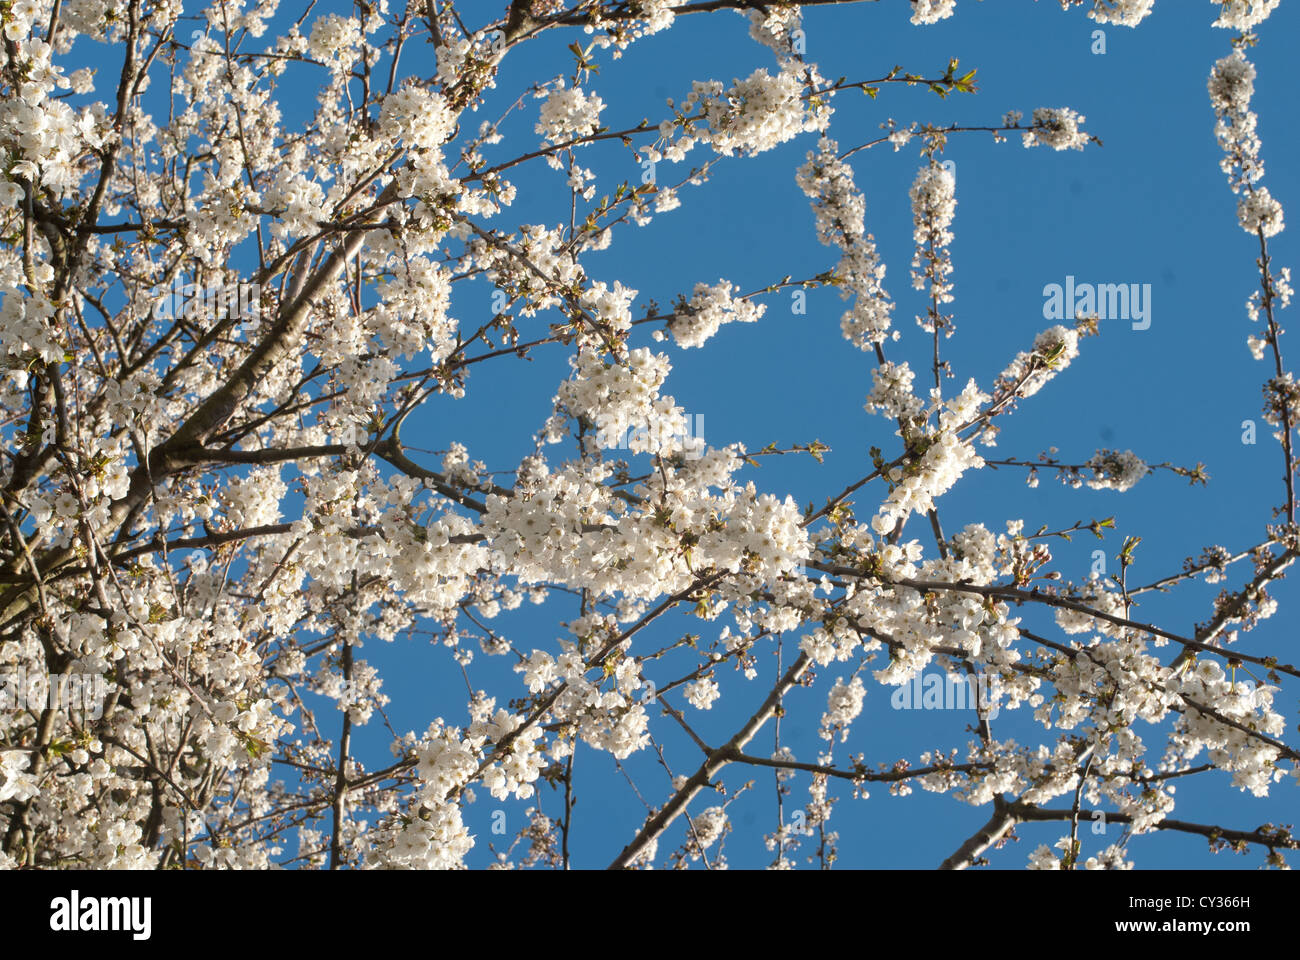 Cherry blossom trees in bloom. Stock Photo